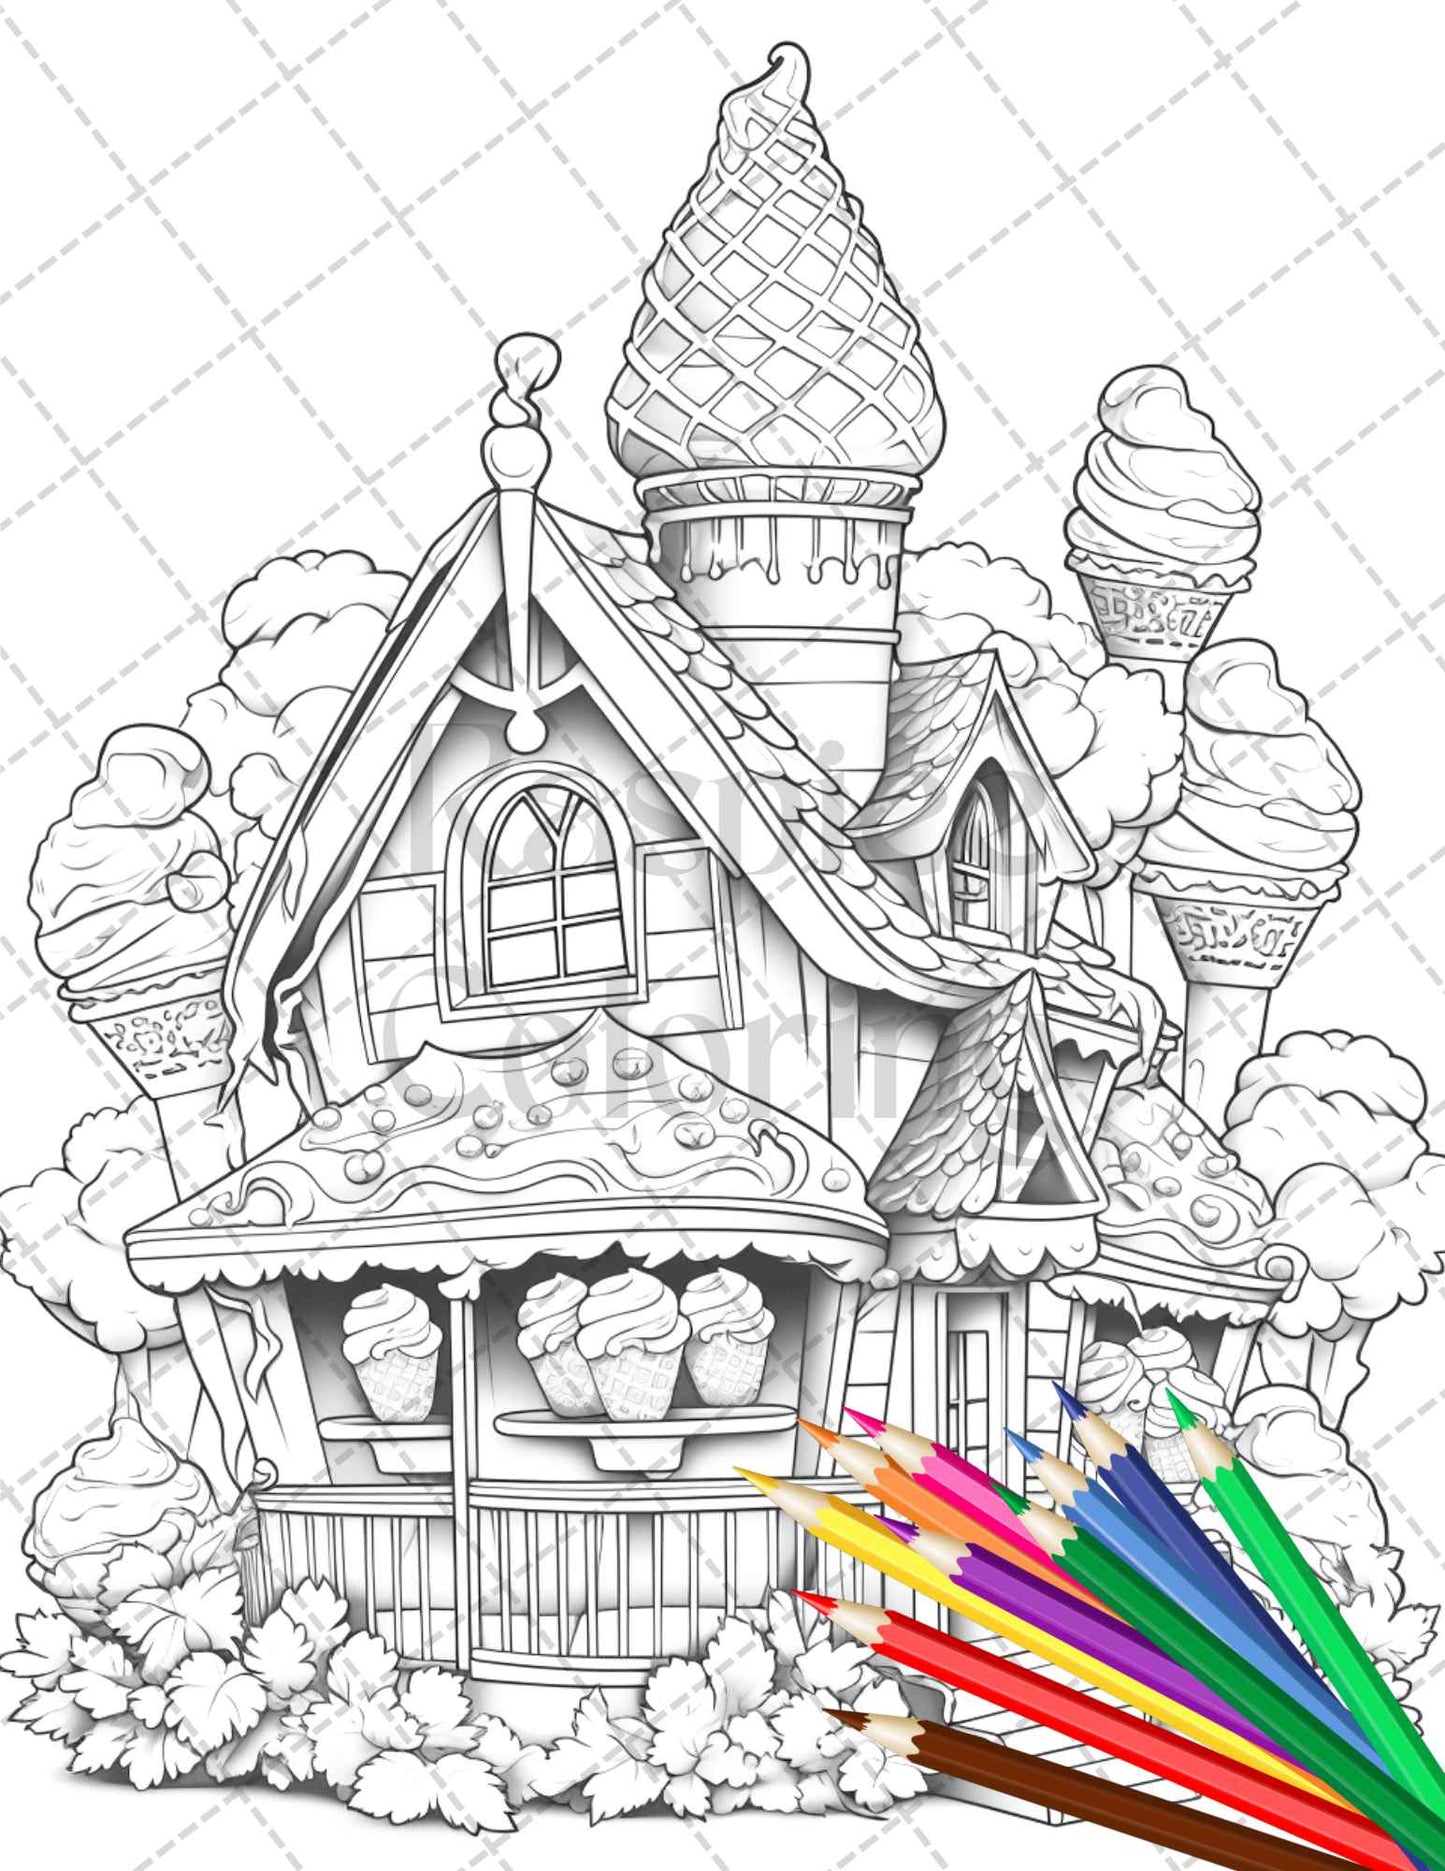 33 Ice Cream Houses Grayscale Coloring Pages Printable for Adults and Kids, PDF File Instant Download - raspiee